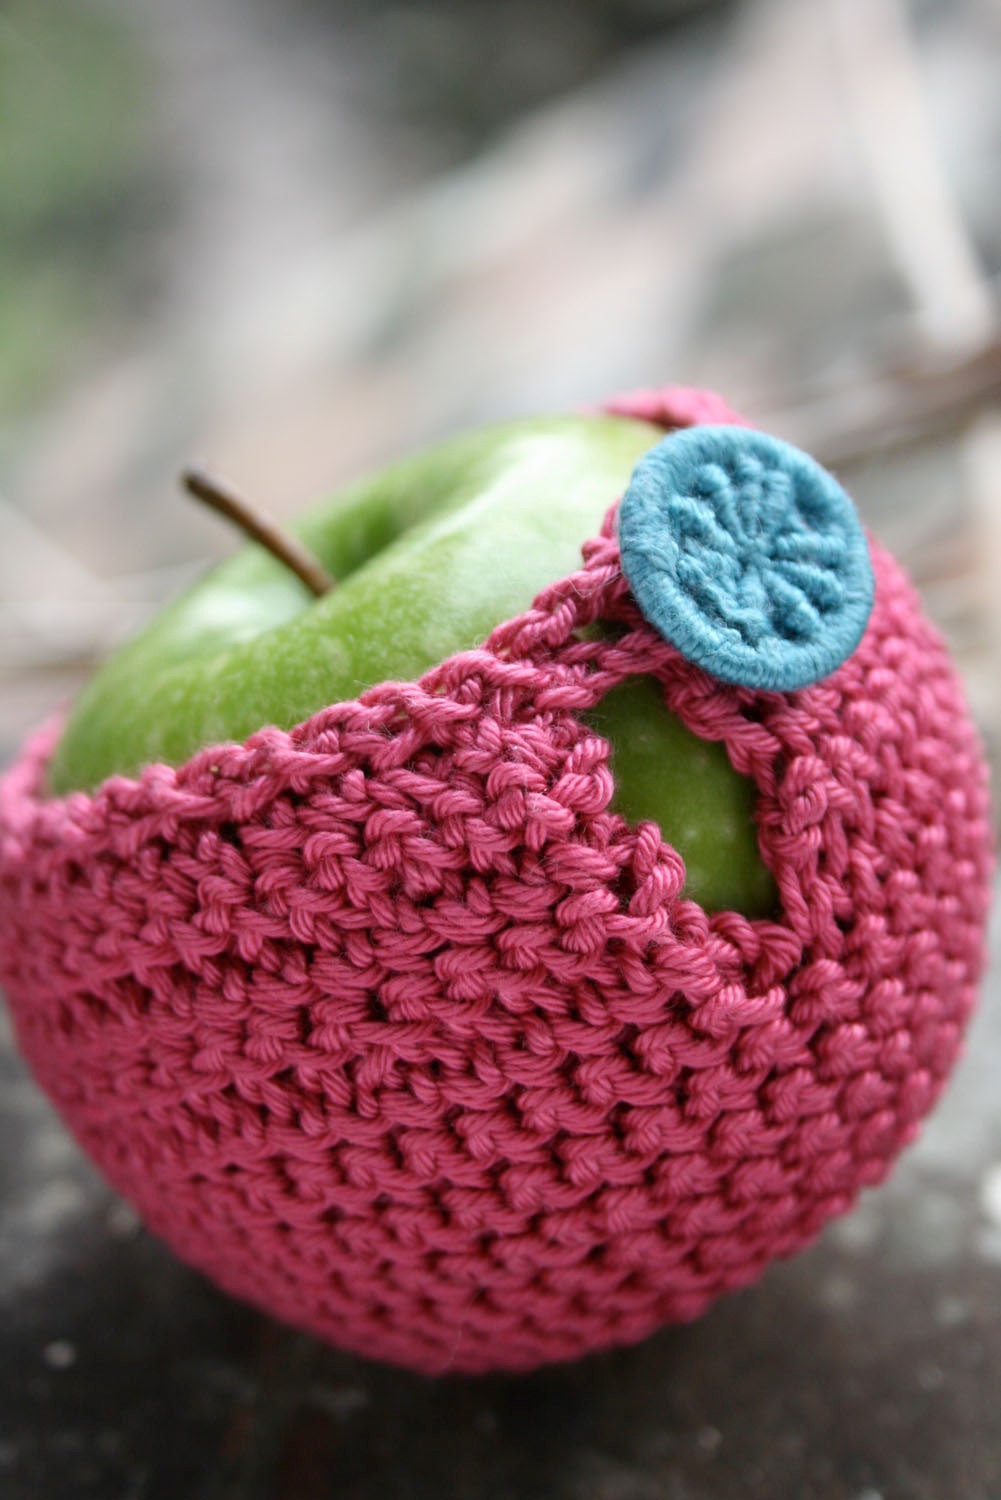 Apple cozy crocheted in pure cotton yarn with a Dorset button